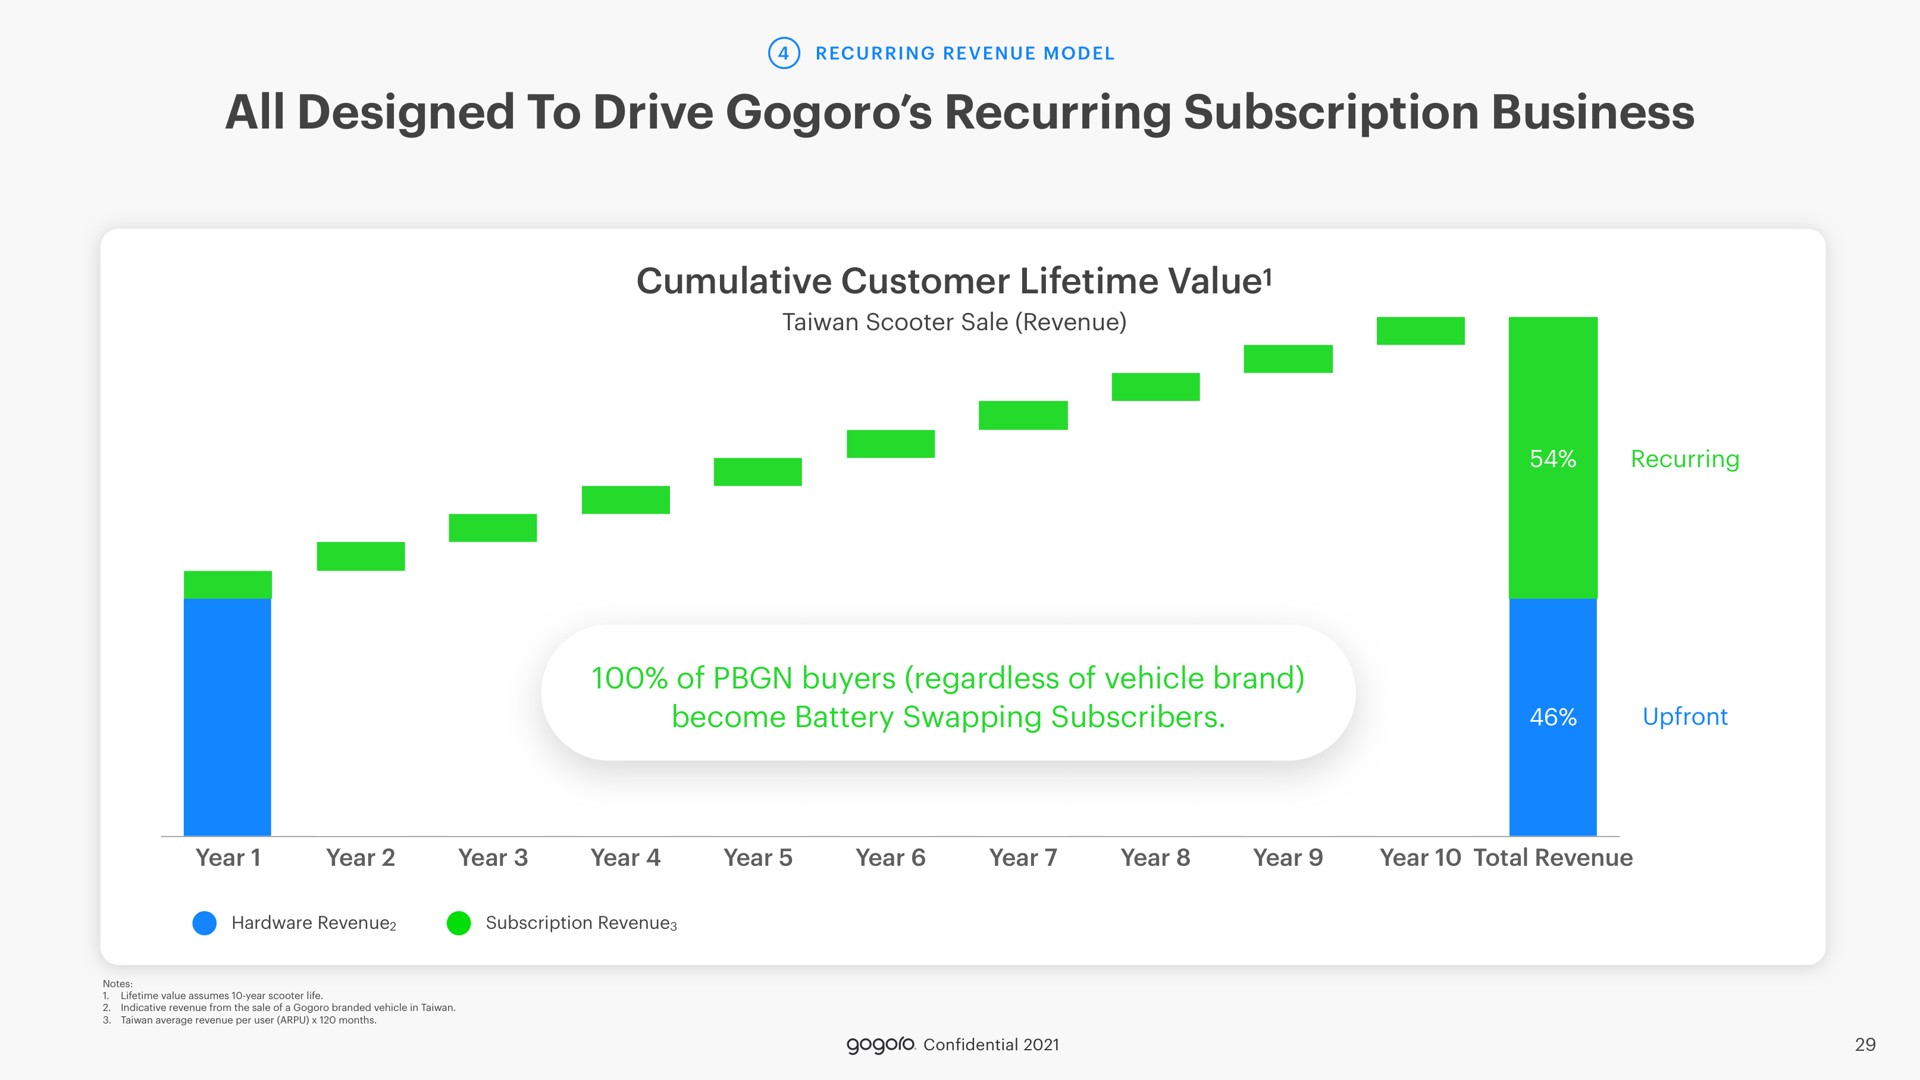 all designed to drive recurring subscription business | Gogoro